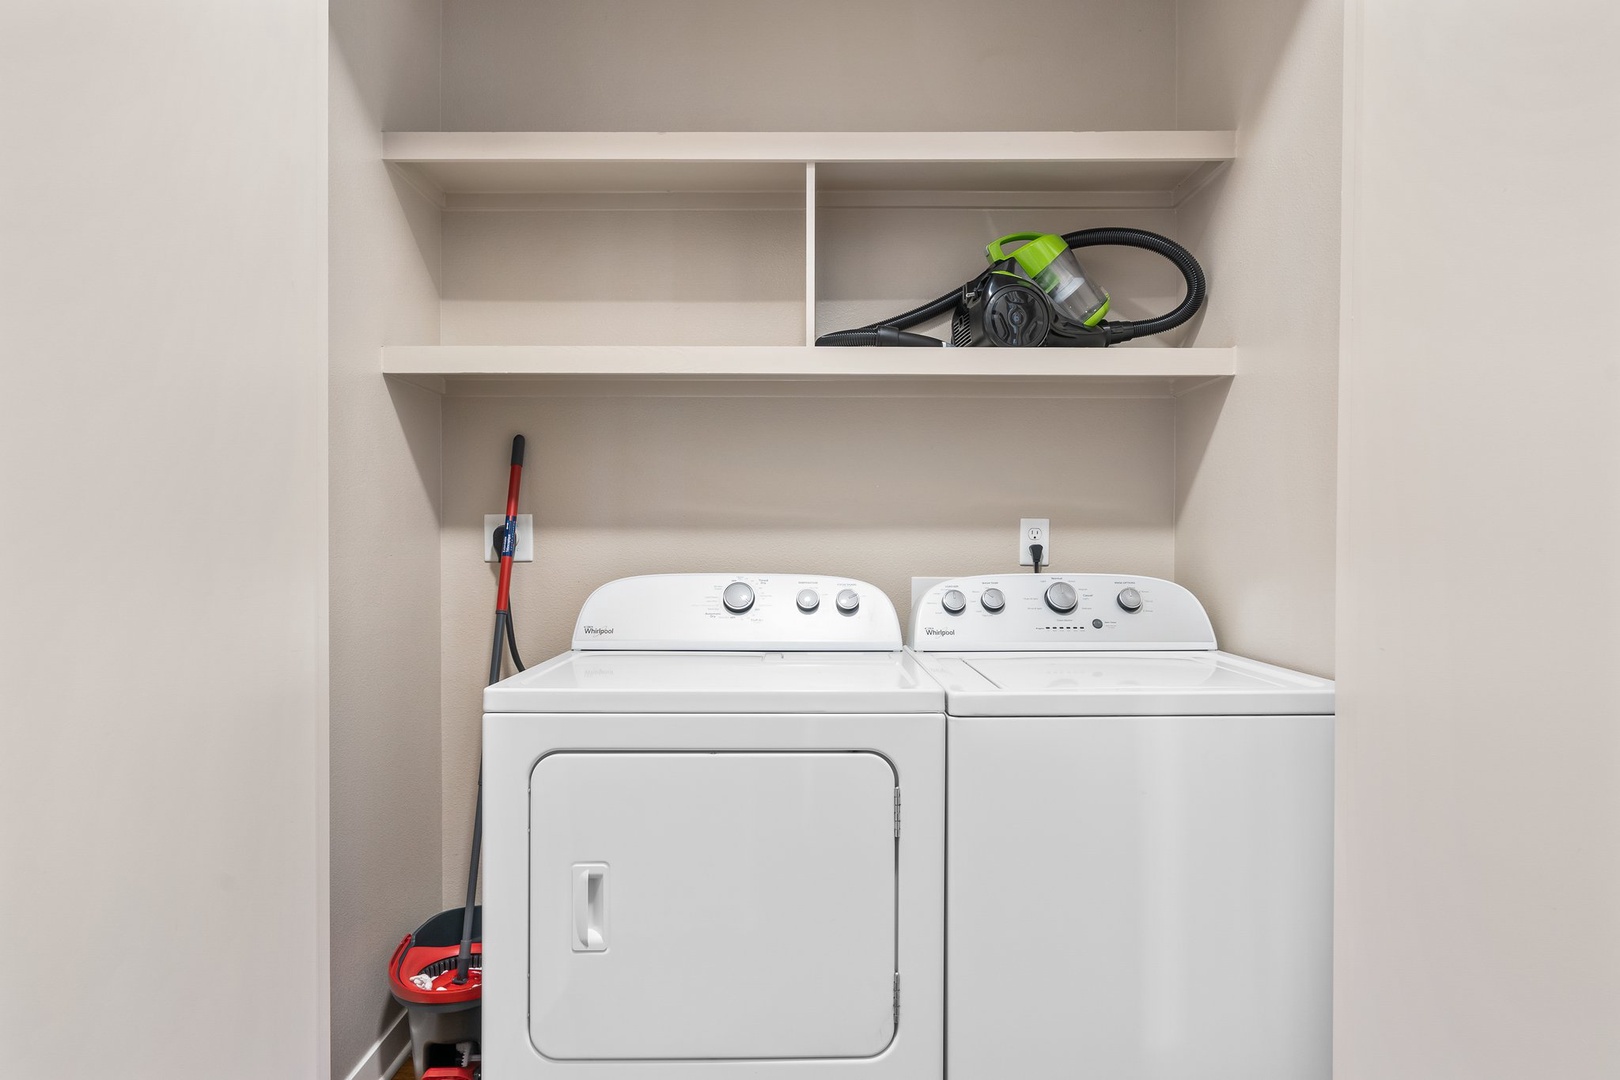 Maintain your wardrobe with the in-unit washer and dryer.